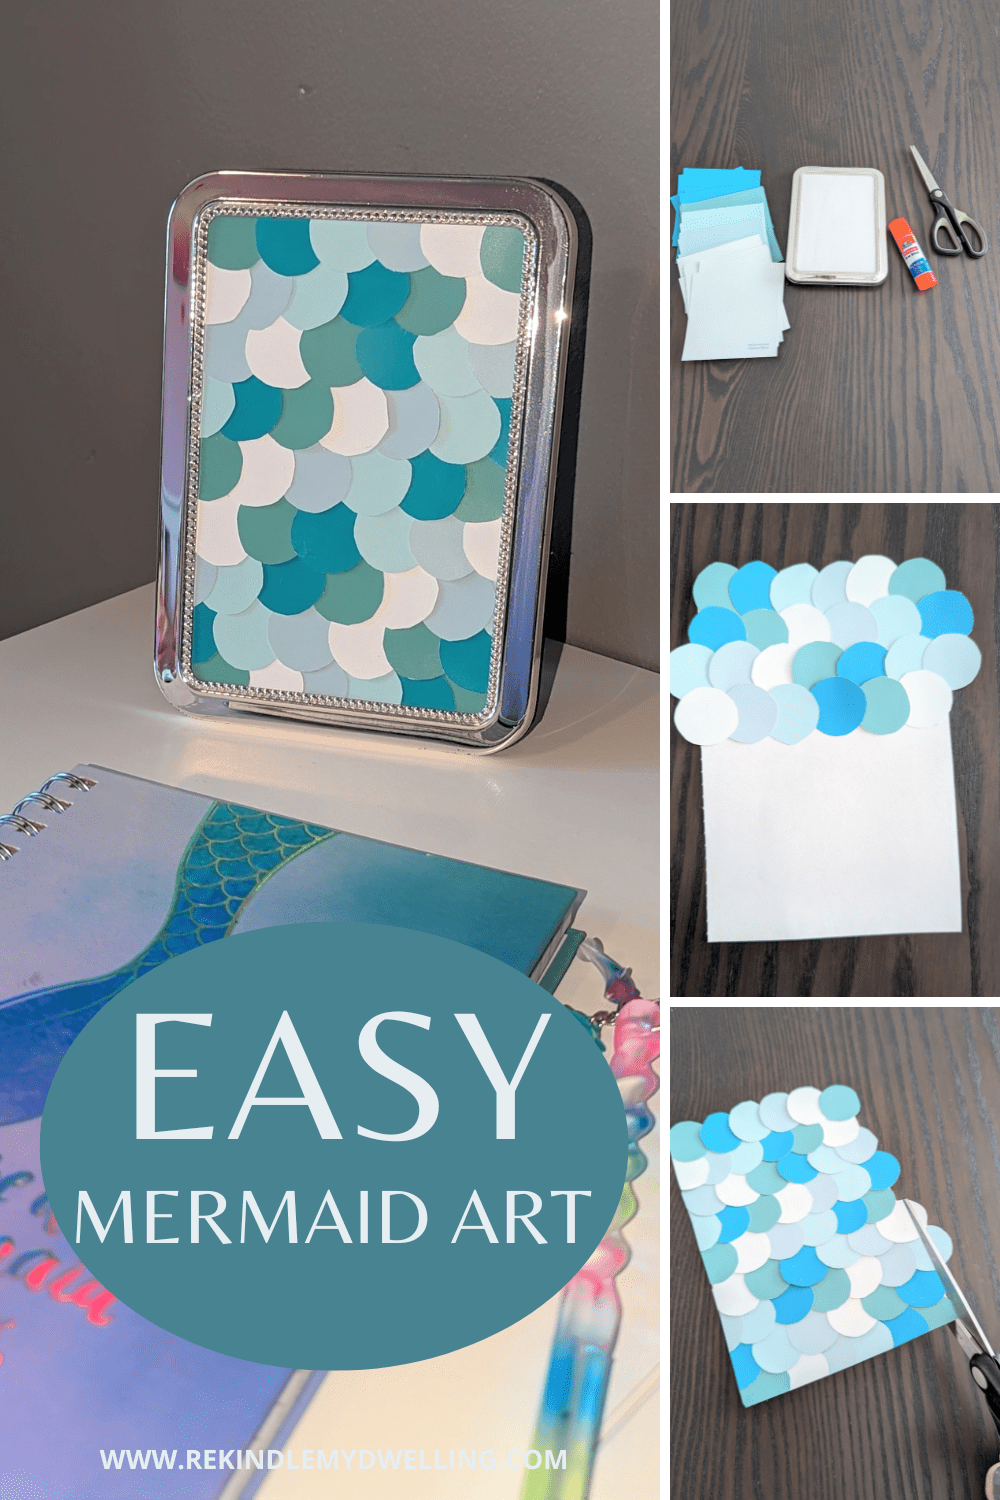 Collage showing the process of making easy mermaid art.